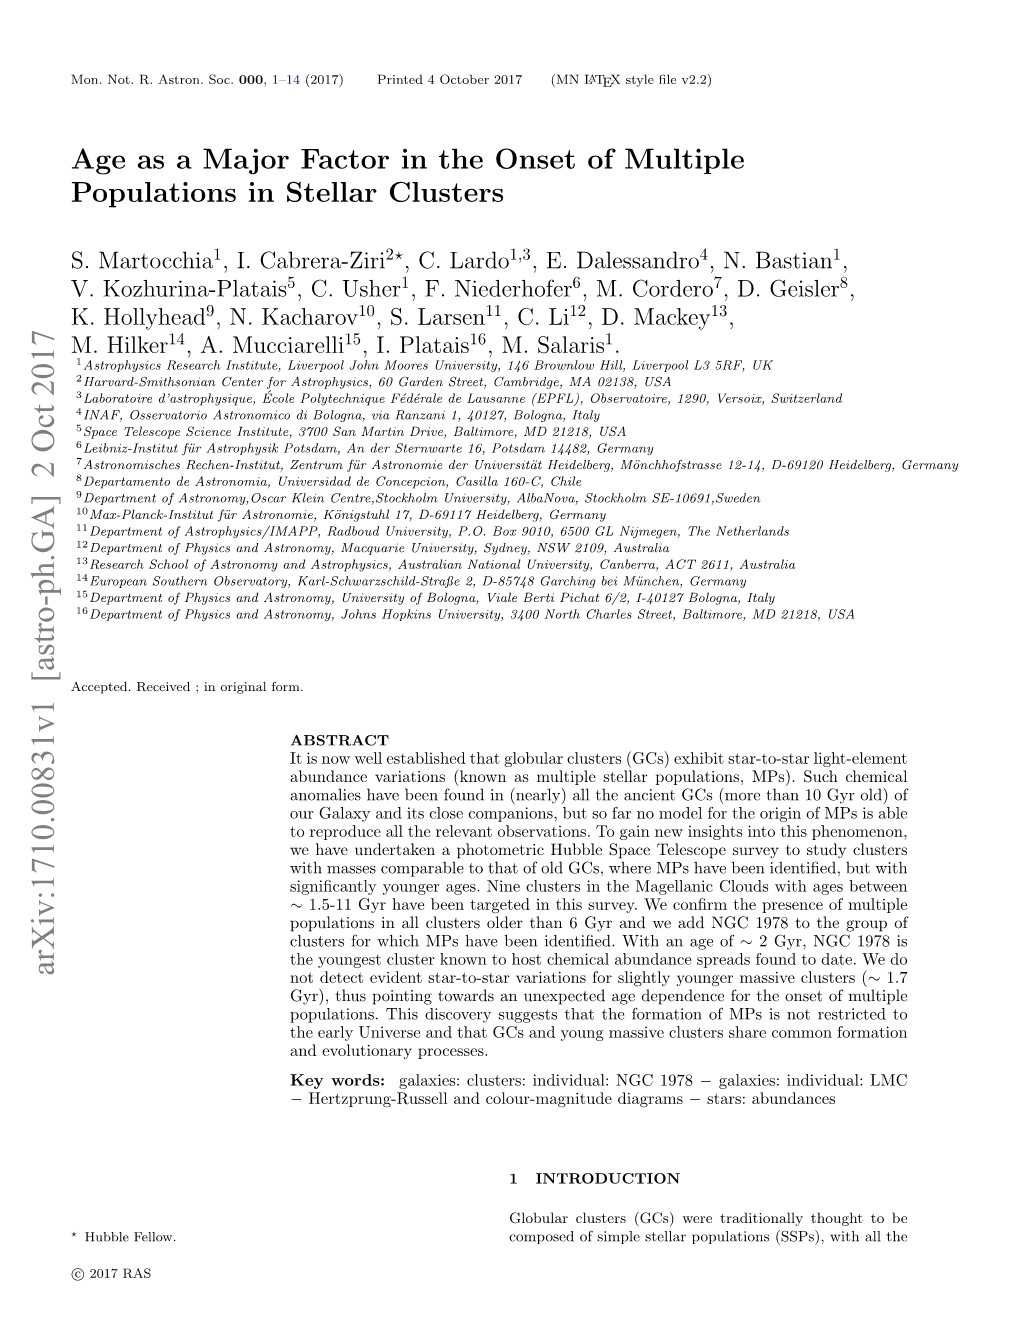 Age As a Major Factor in the Onset of Multiple Populations in Stellar Clusters